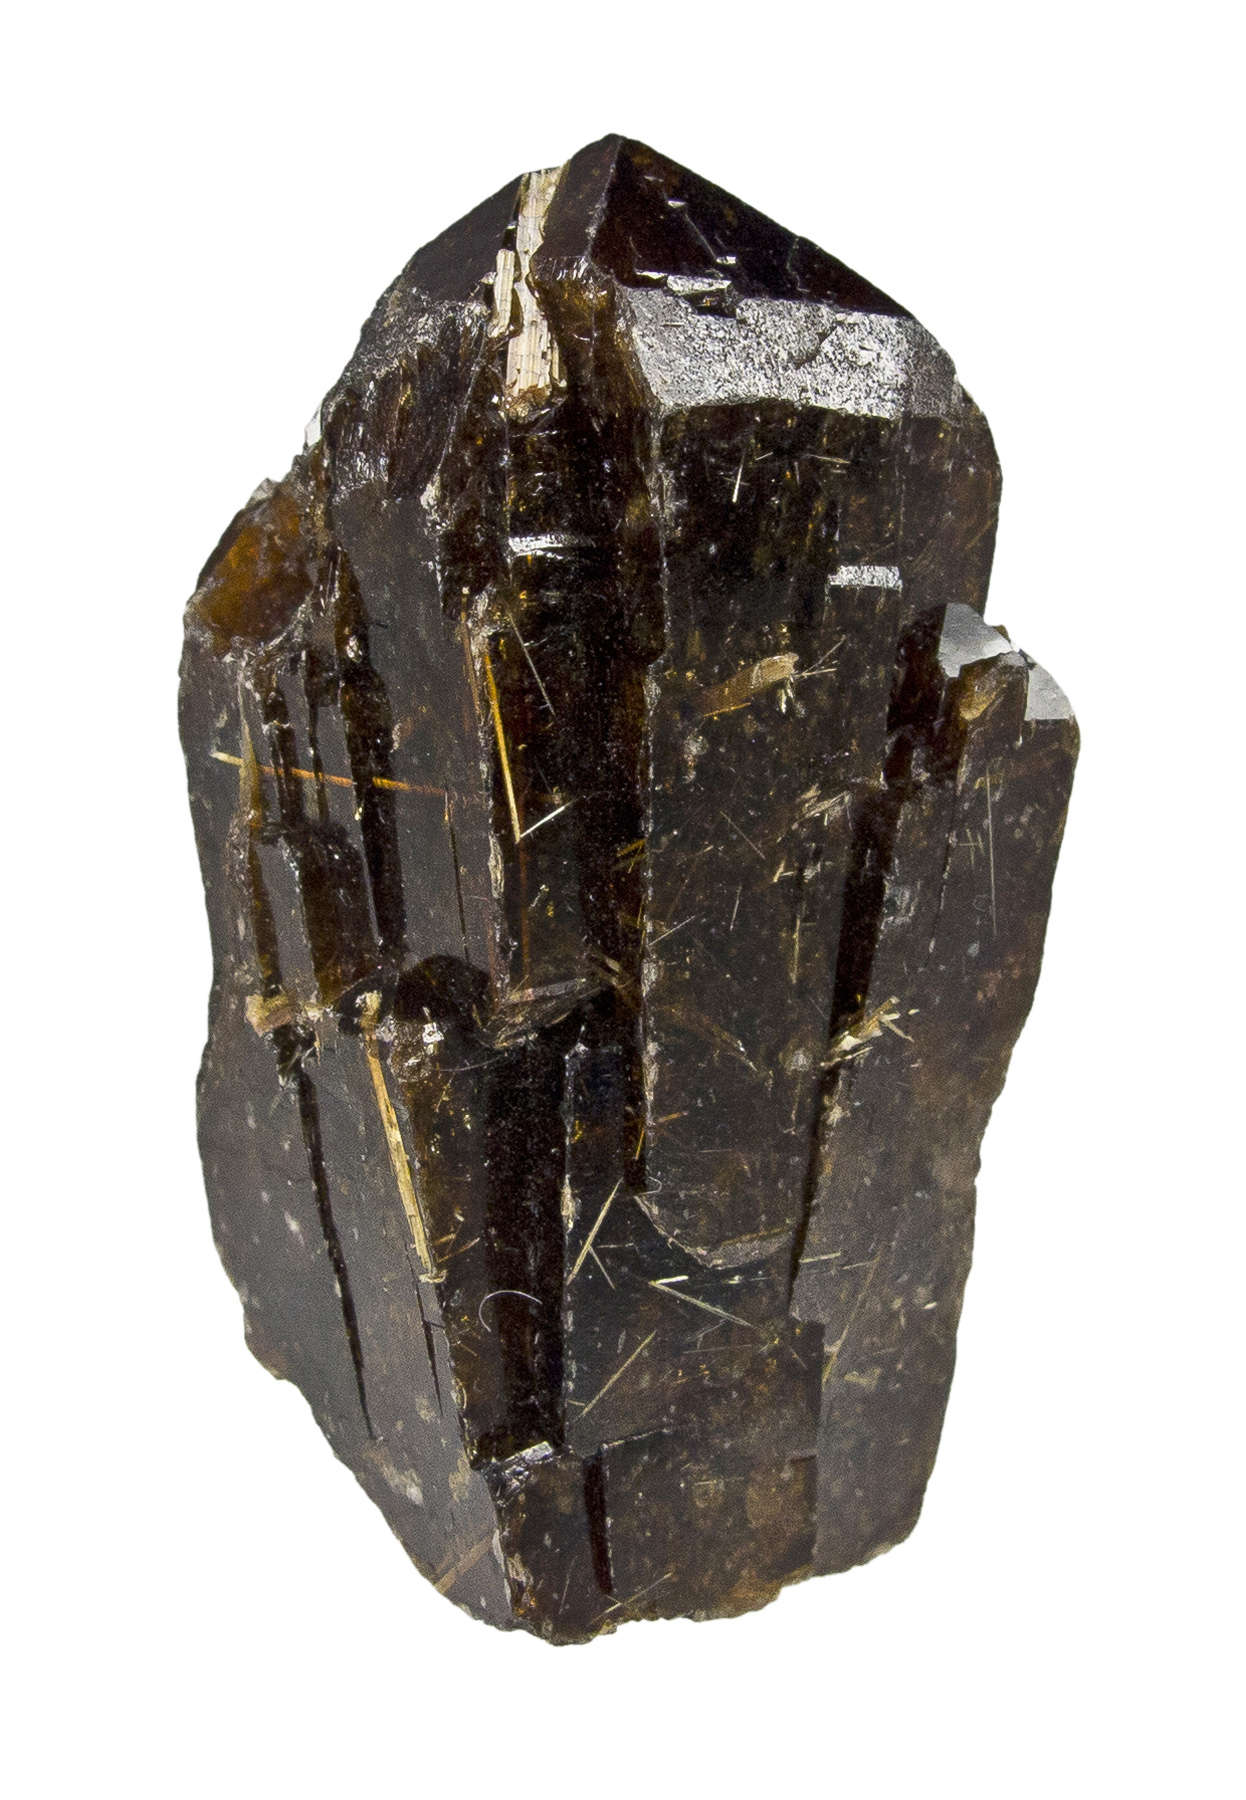 Rocket Shaped Xenotime with Rutile